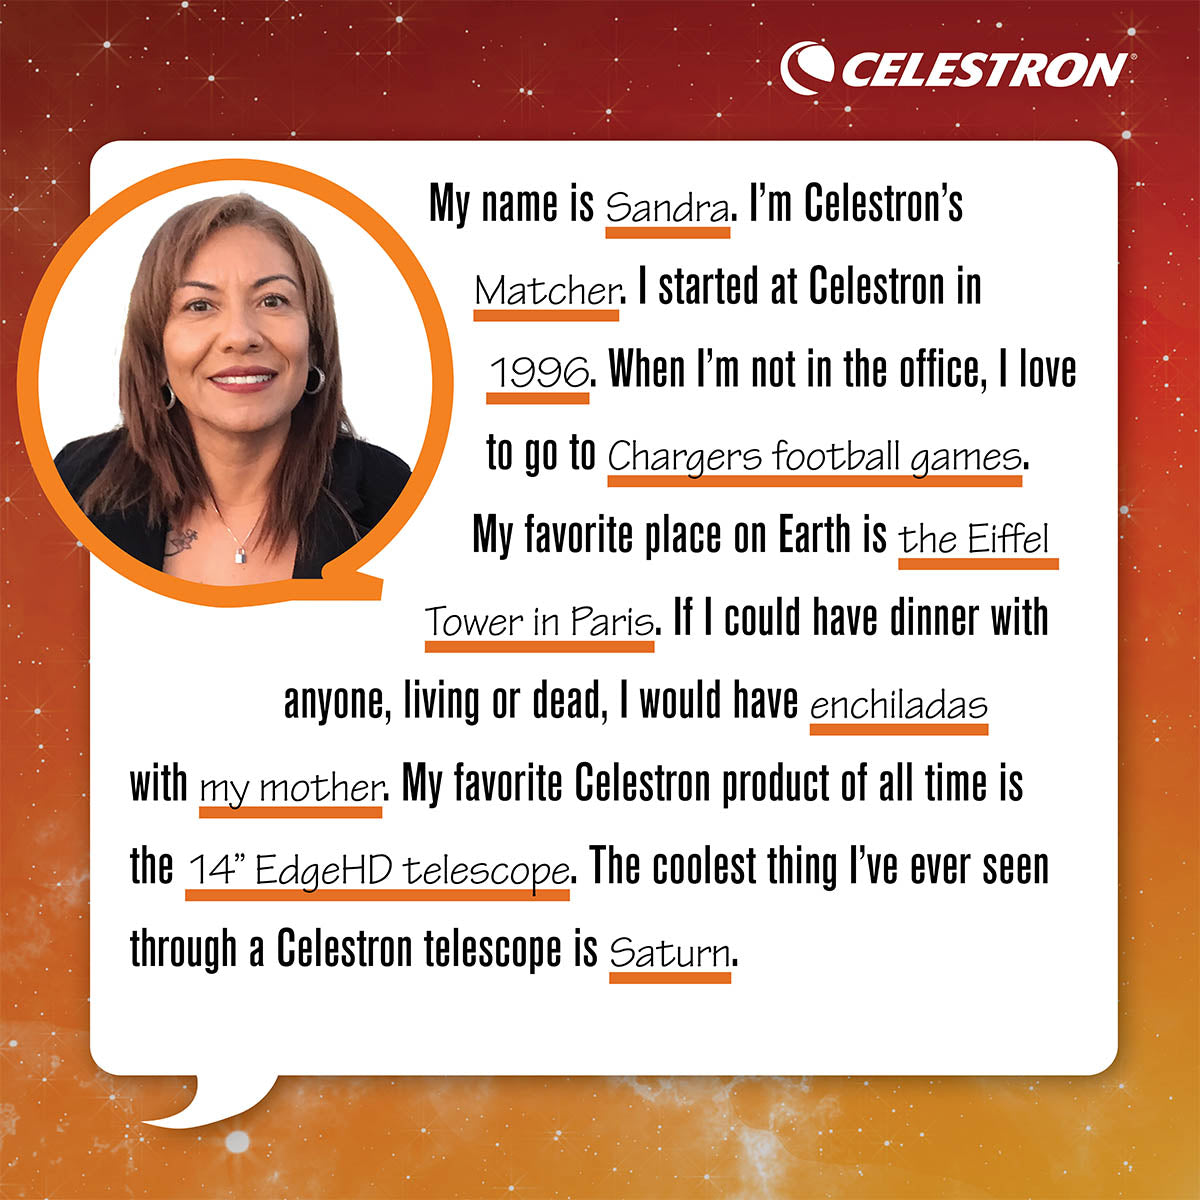 My name is Sandra. I'm Celestron's Matcher. I started at Celestron in 1996. When I'm not in the office, I love to go to Chargers football games.  My favorite place on Earth is the Eiffel Tower in Paris. If I could have dinner with anyone, living or dead, I would have enchiladas with my mother. My favorite Celestron product of all time is the 14 EdgeHD telescope. The coolest thing I've ever seen through a Celestron telescope is Saturn.